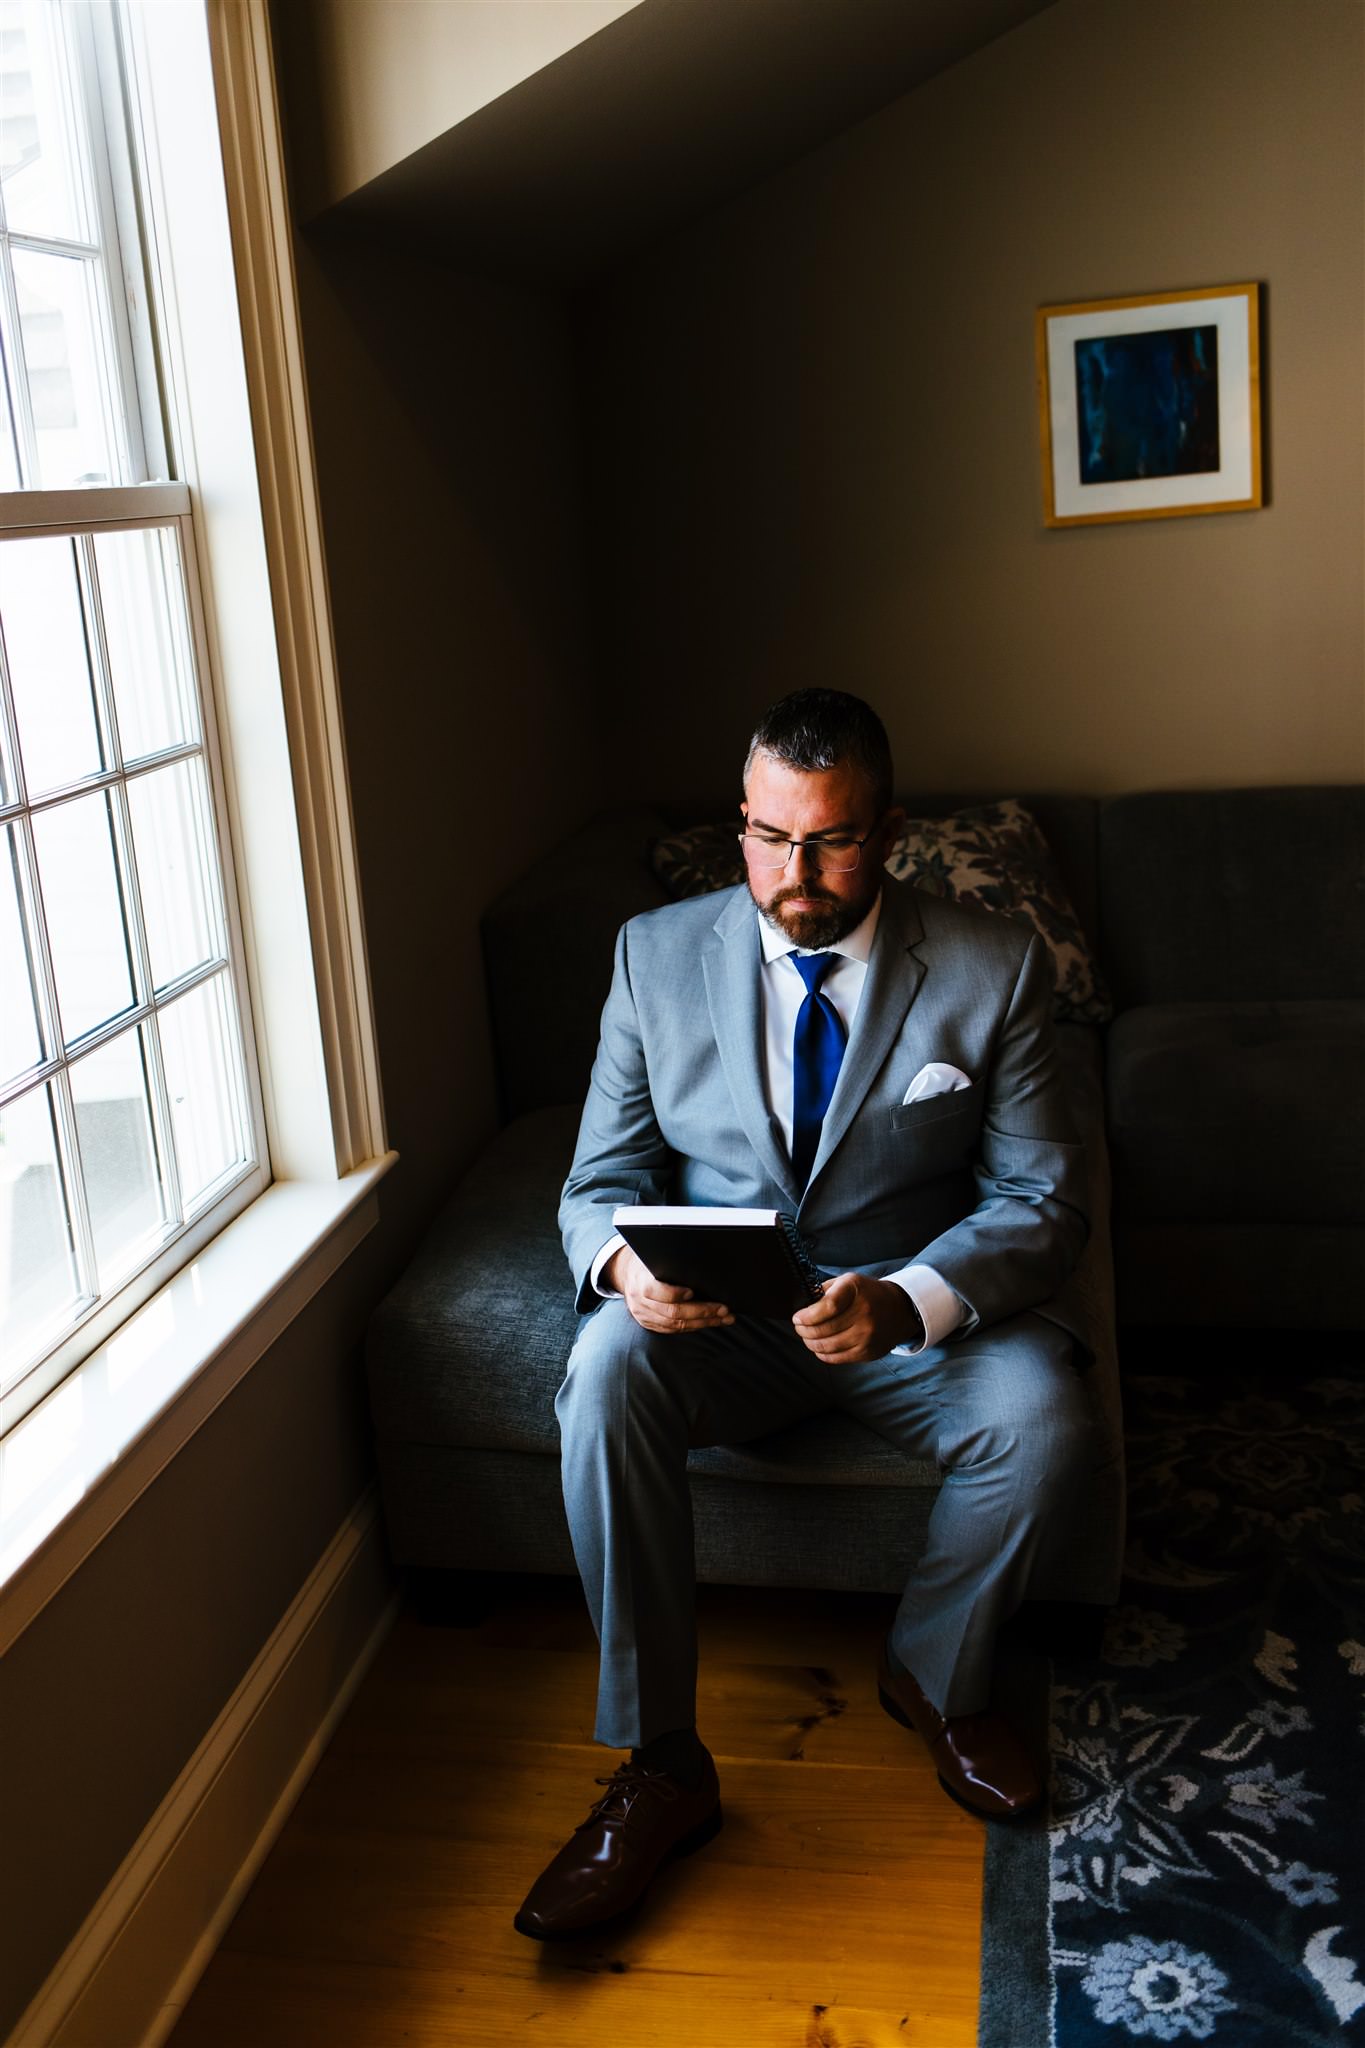 The groom reads a note as he gets ready for his wedding day.